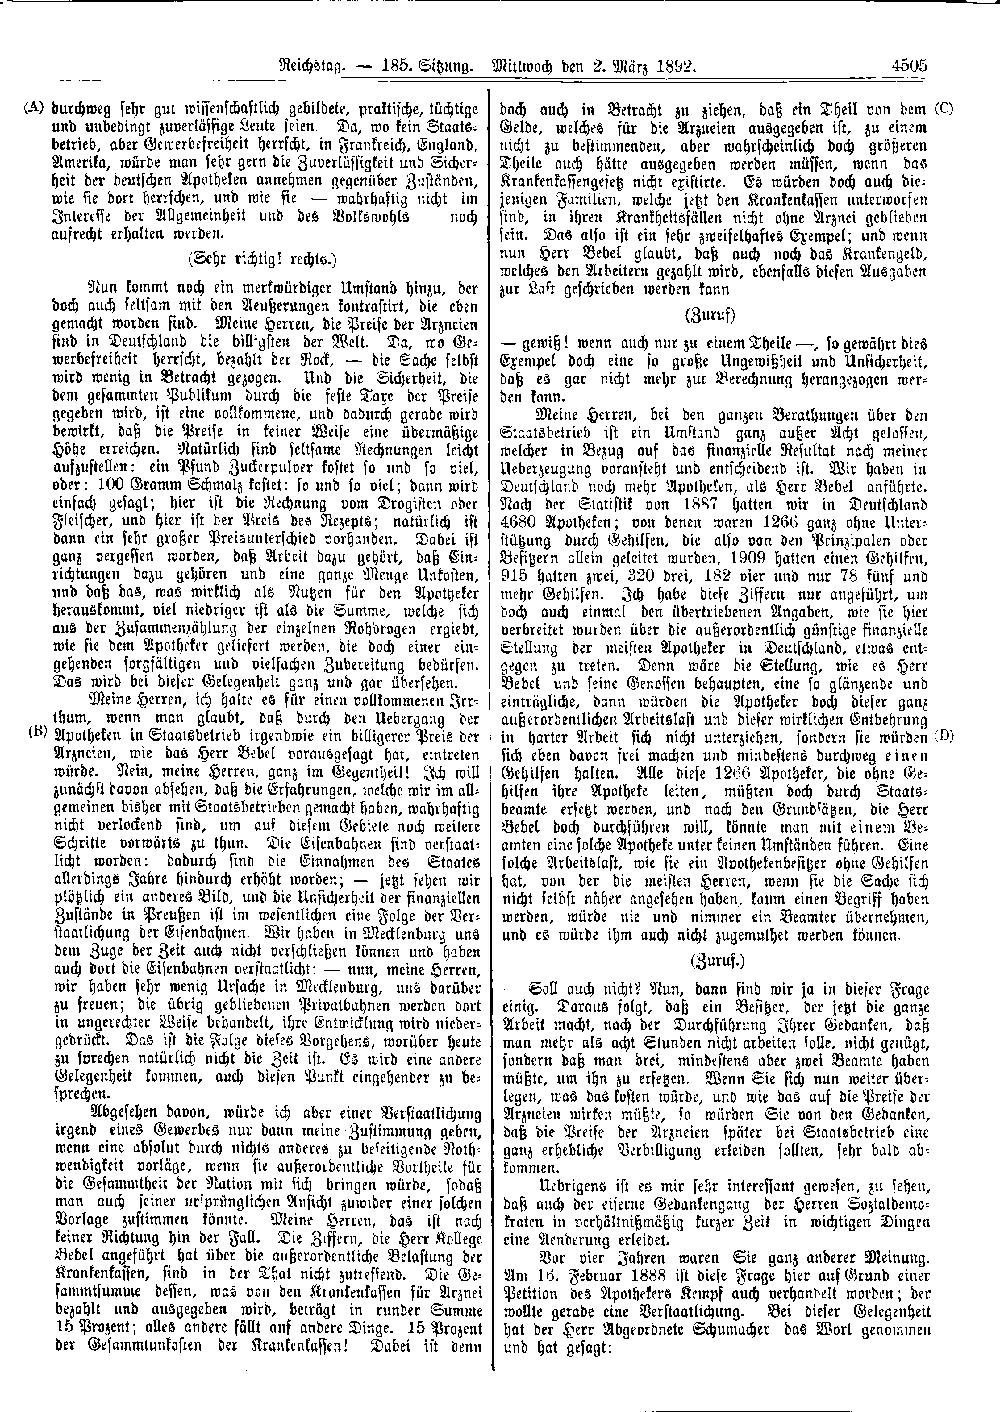 Scan of page 4505